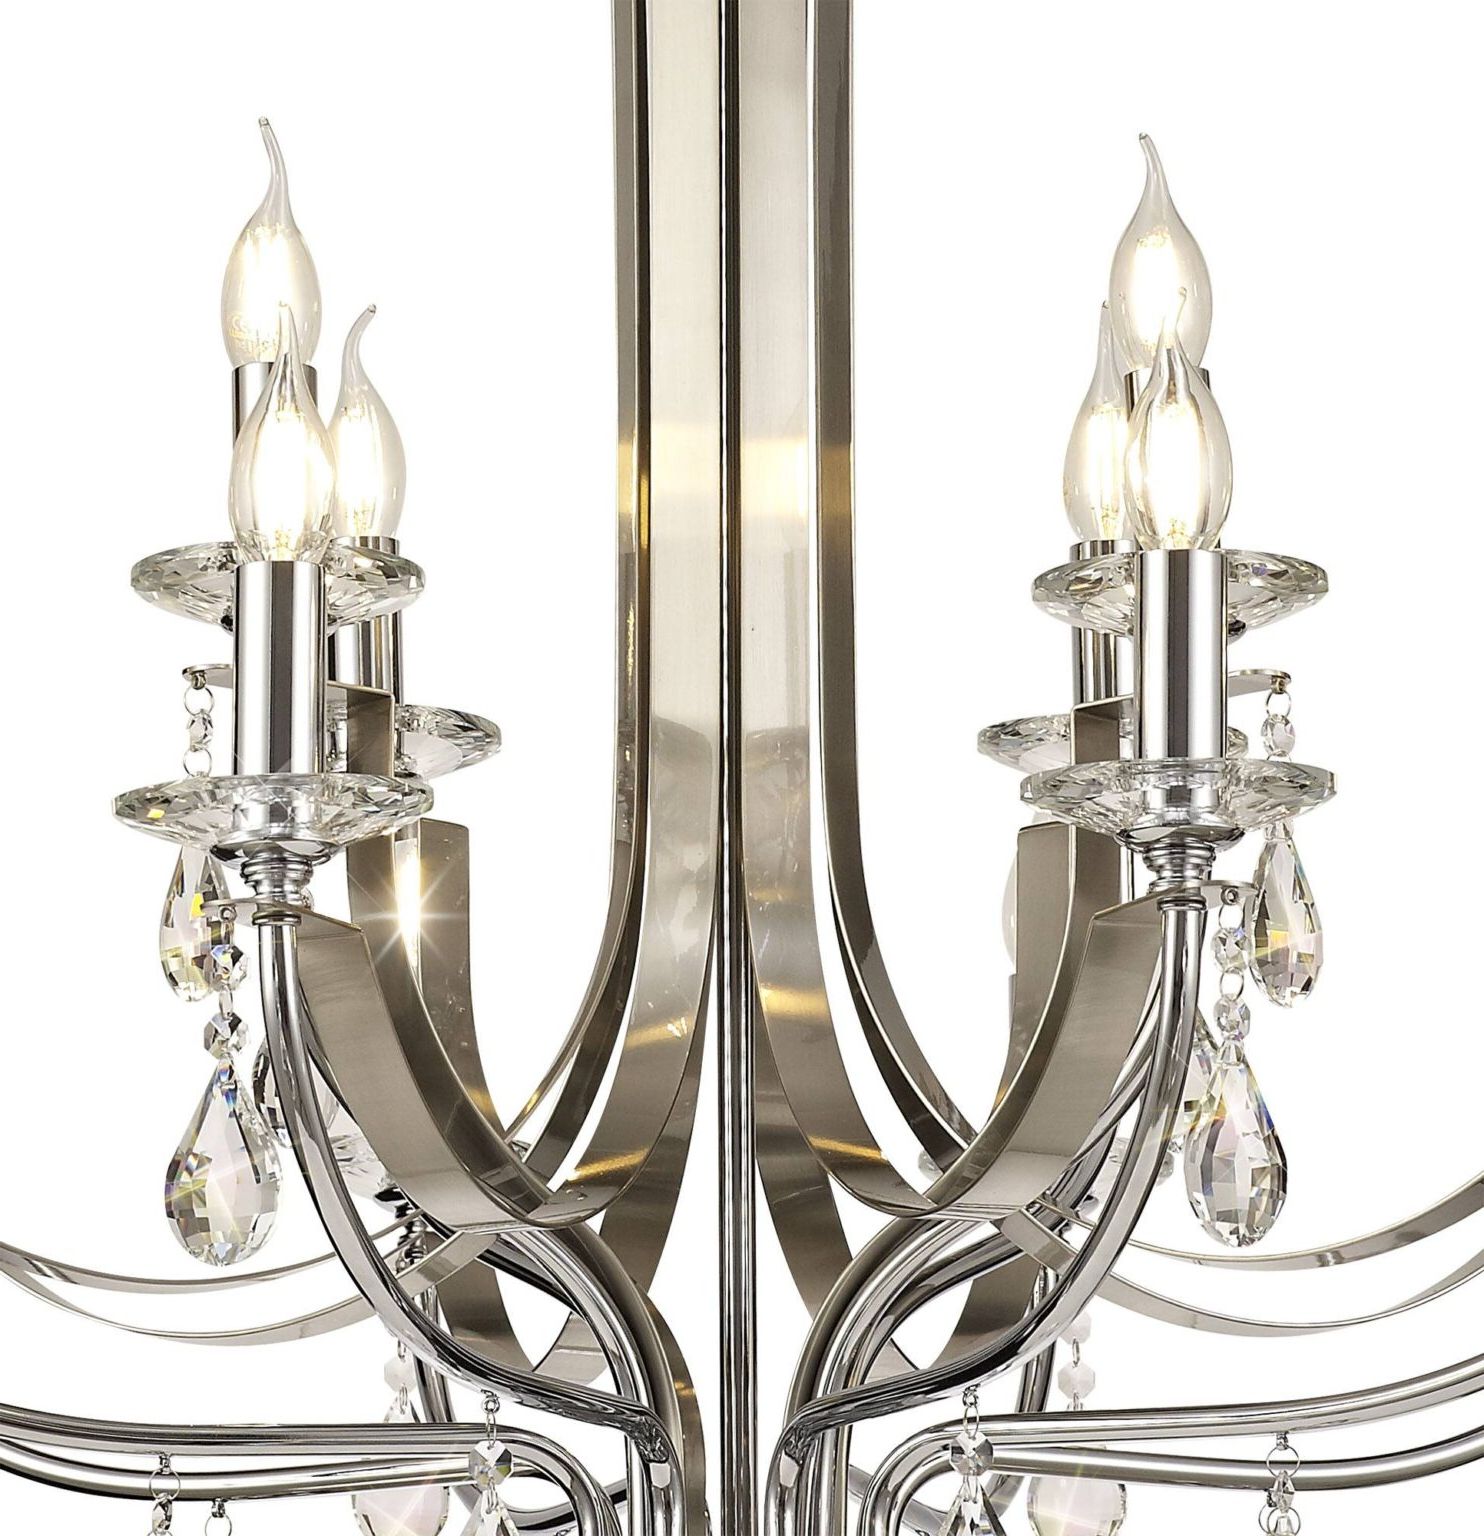 Avilia Pendant 12 Light E14 Polished Chrome/satin Nickel Within 2019 Satin Nickel Crystal Chandeliers (View 17 of 20)